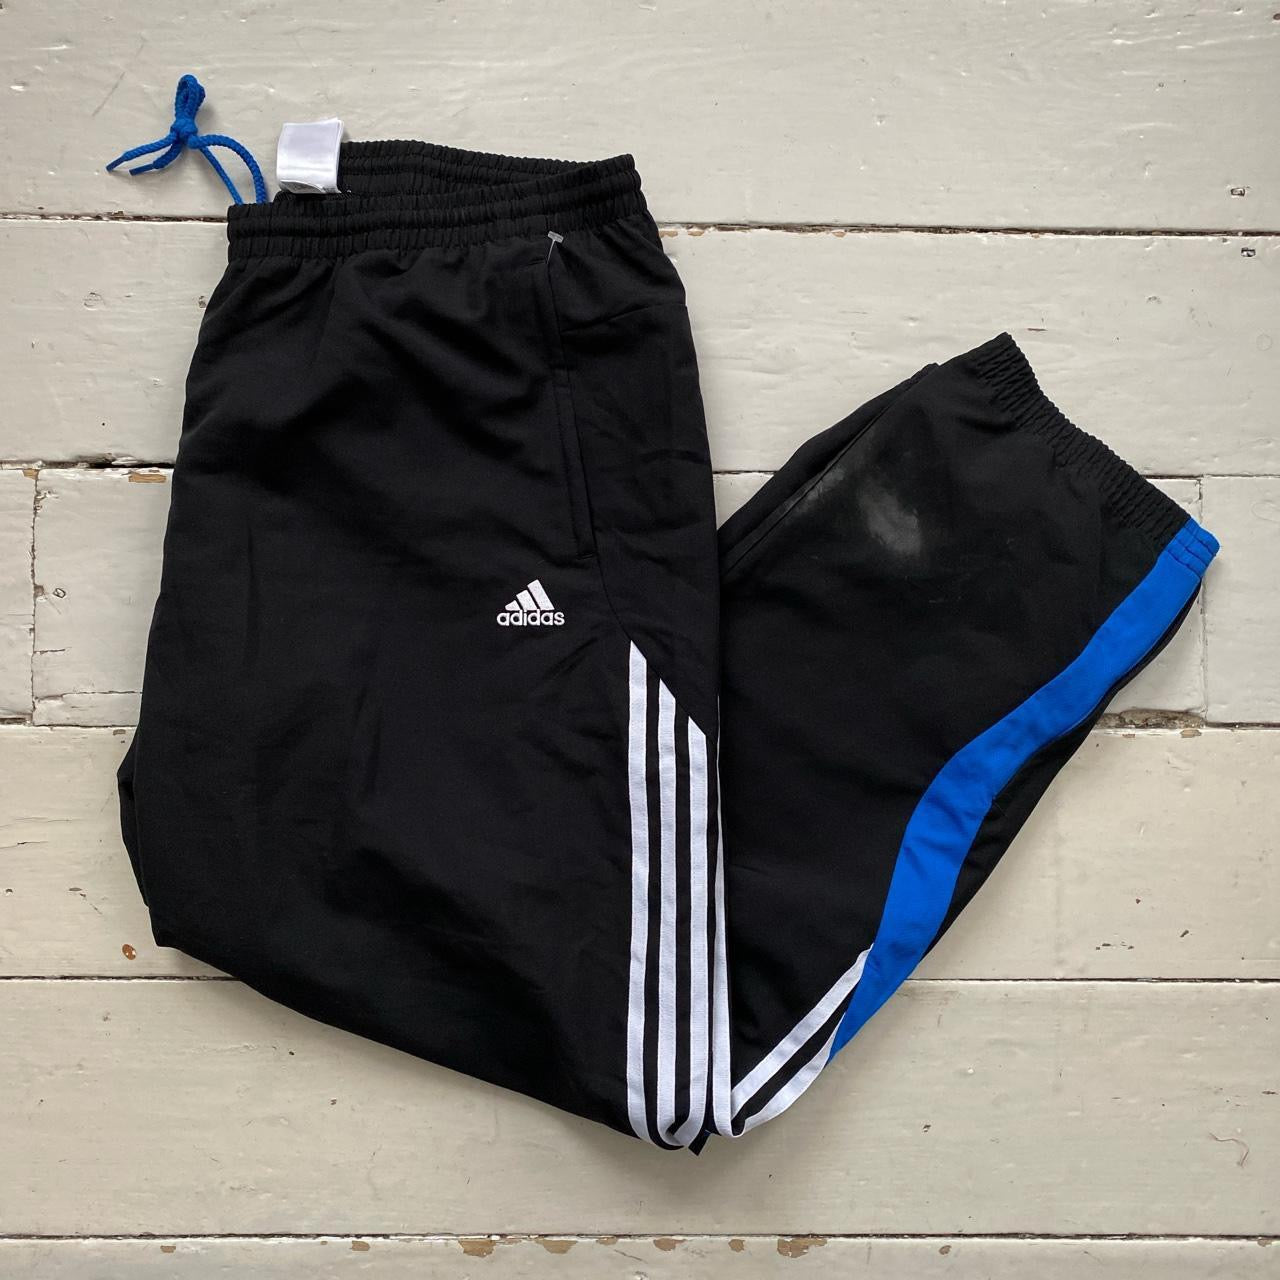 Adidas Black and Blue Shell Bottoms (XXL)